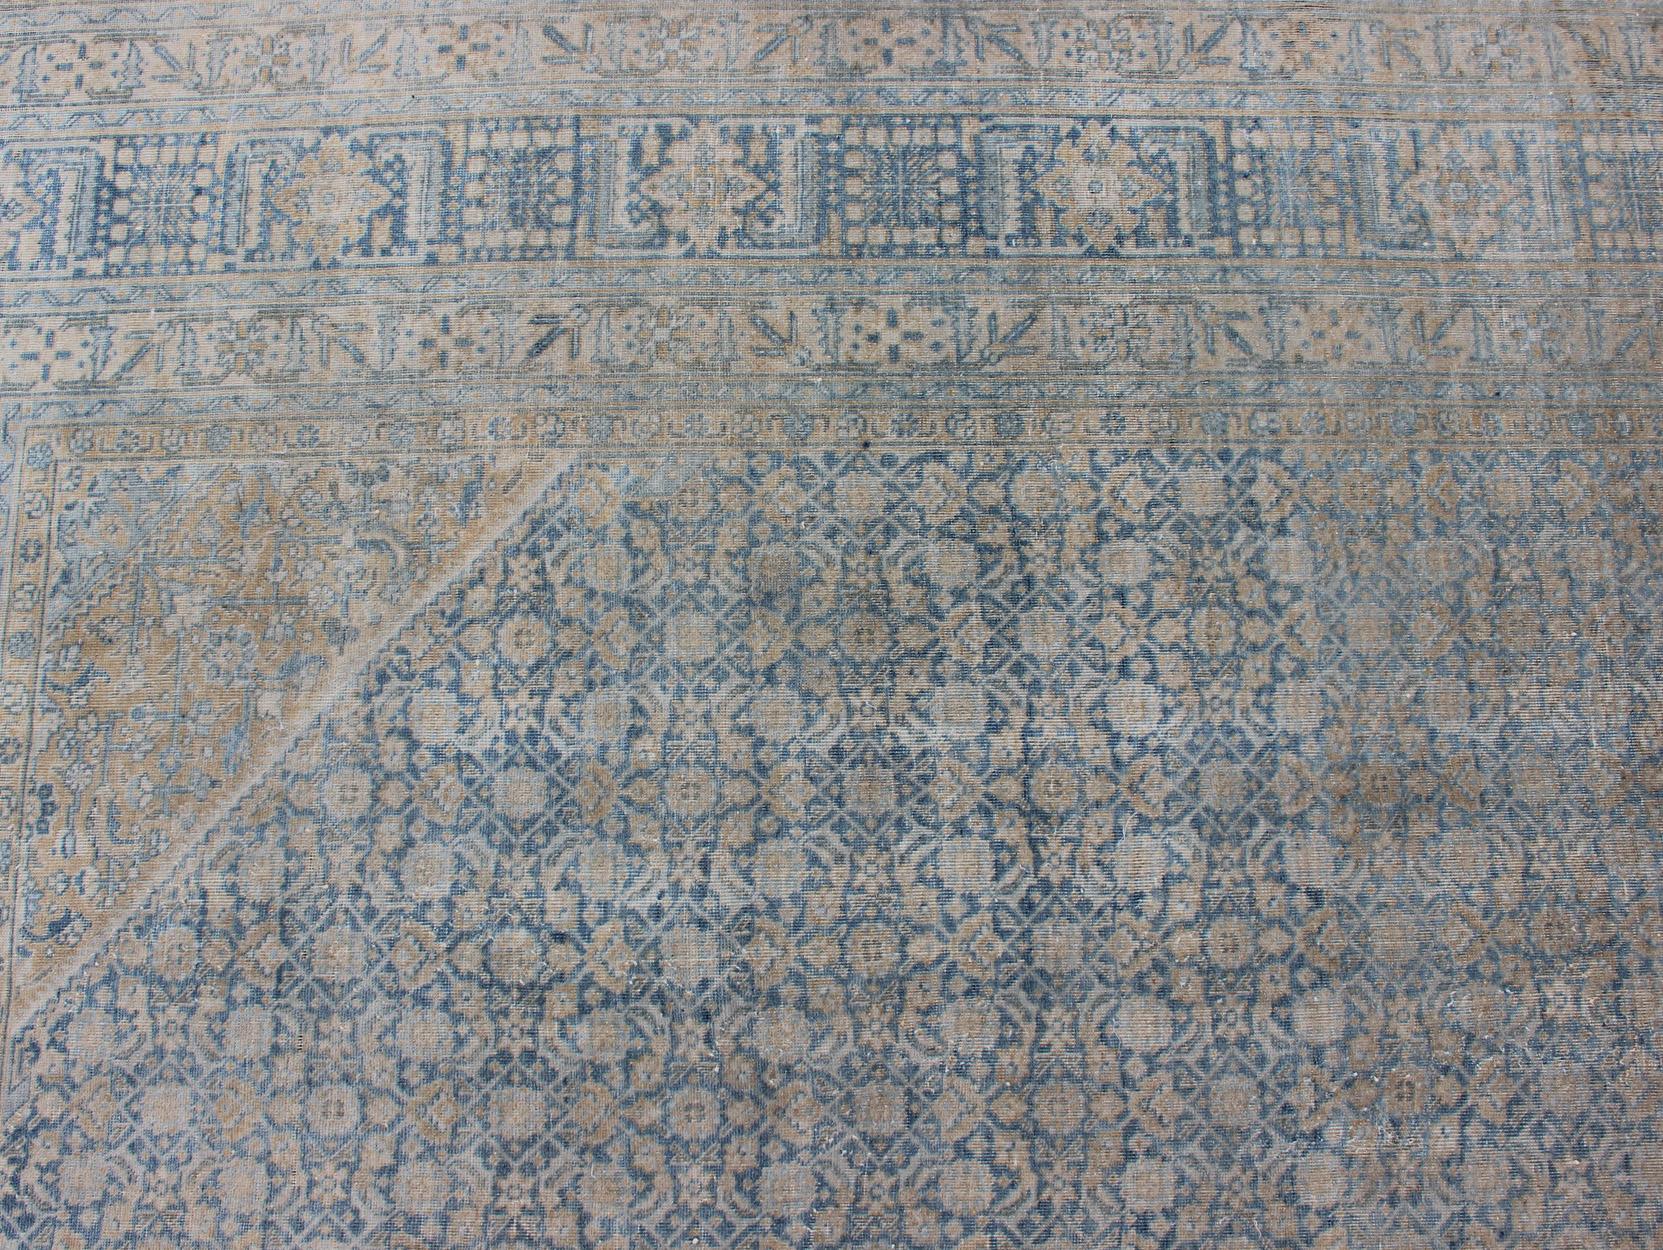 Large Antique Persian Tabriz Rug in All-Over Herati in Shades of Blue and Tan  For Sale 5